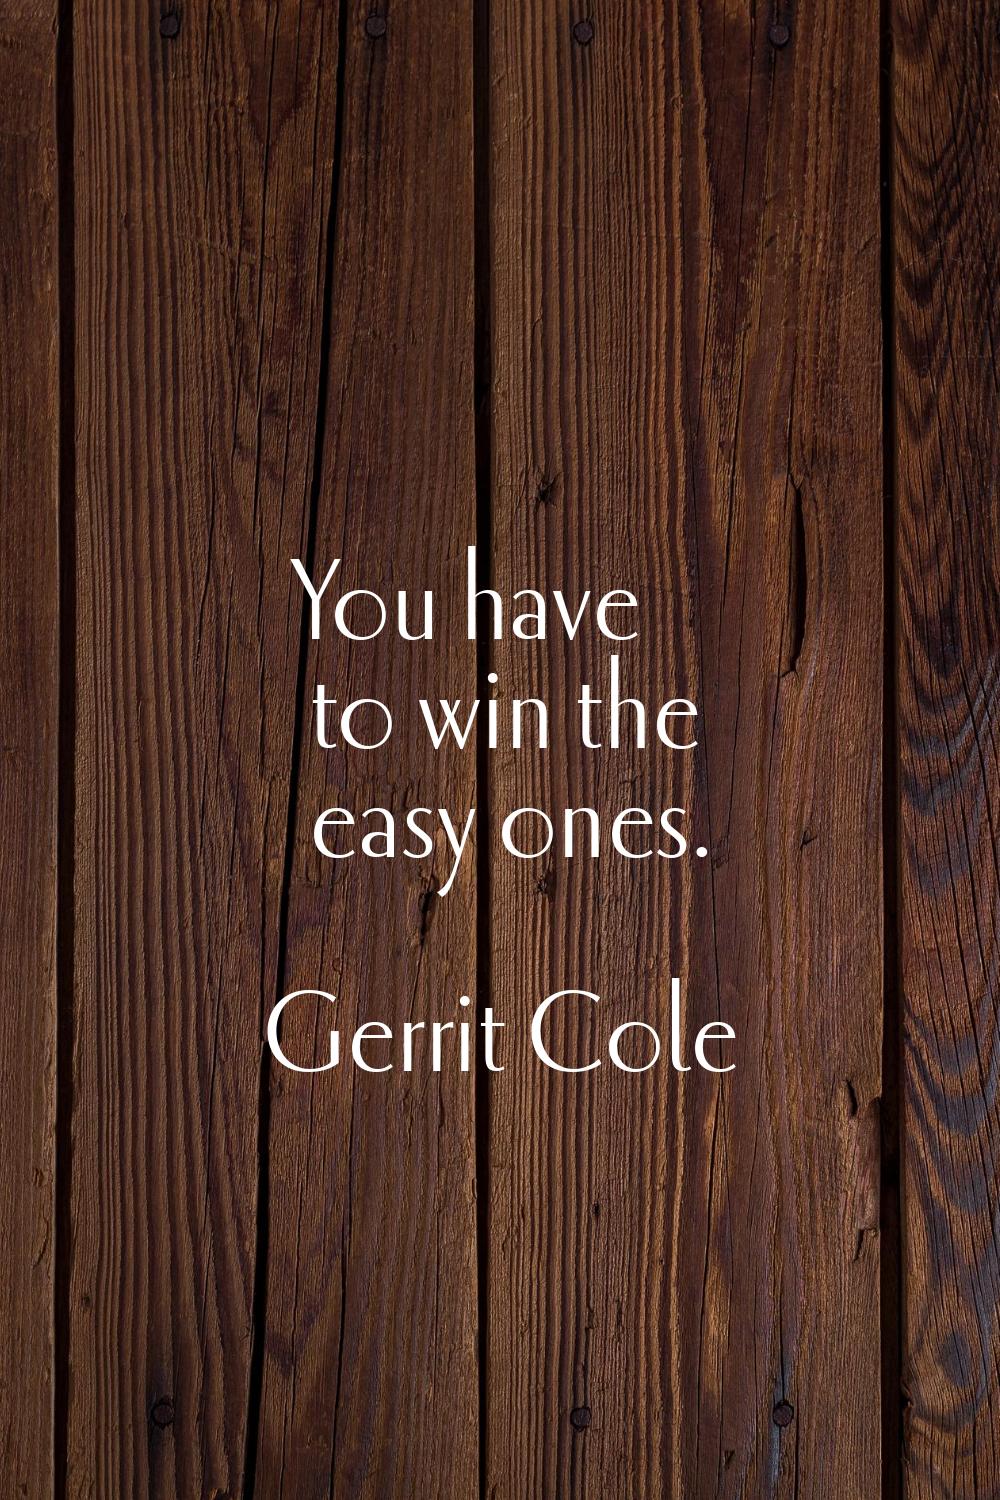 You have to win the easy ones.